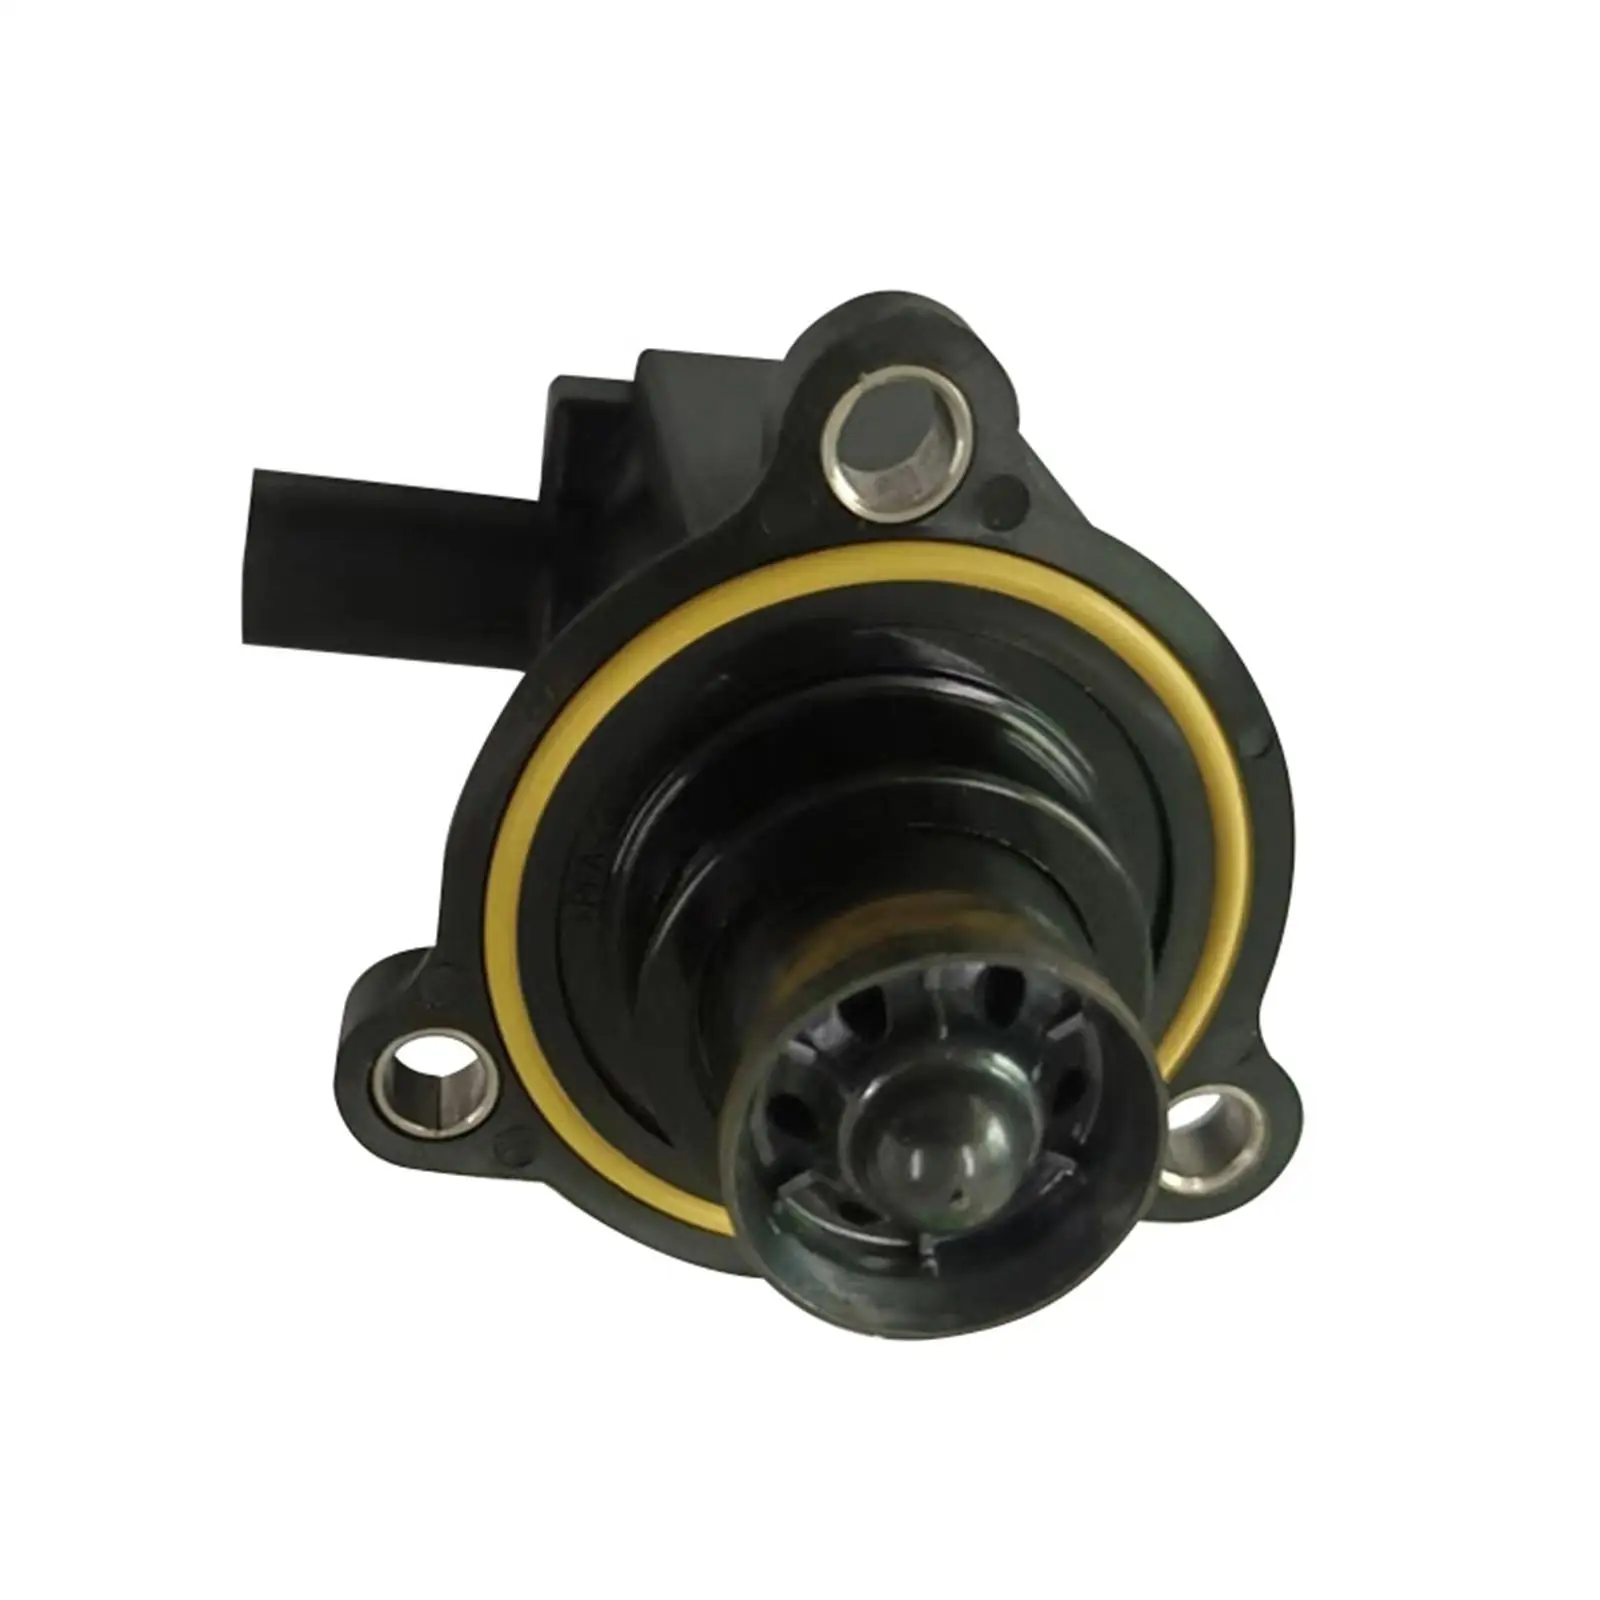 Turbocharger Valve Professional Accessory Spare Parts Replaces Easy to Install